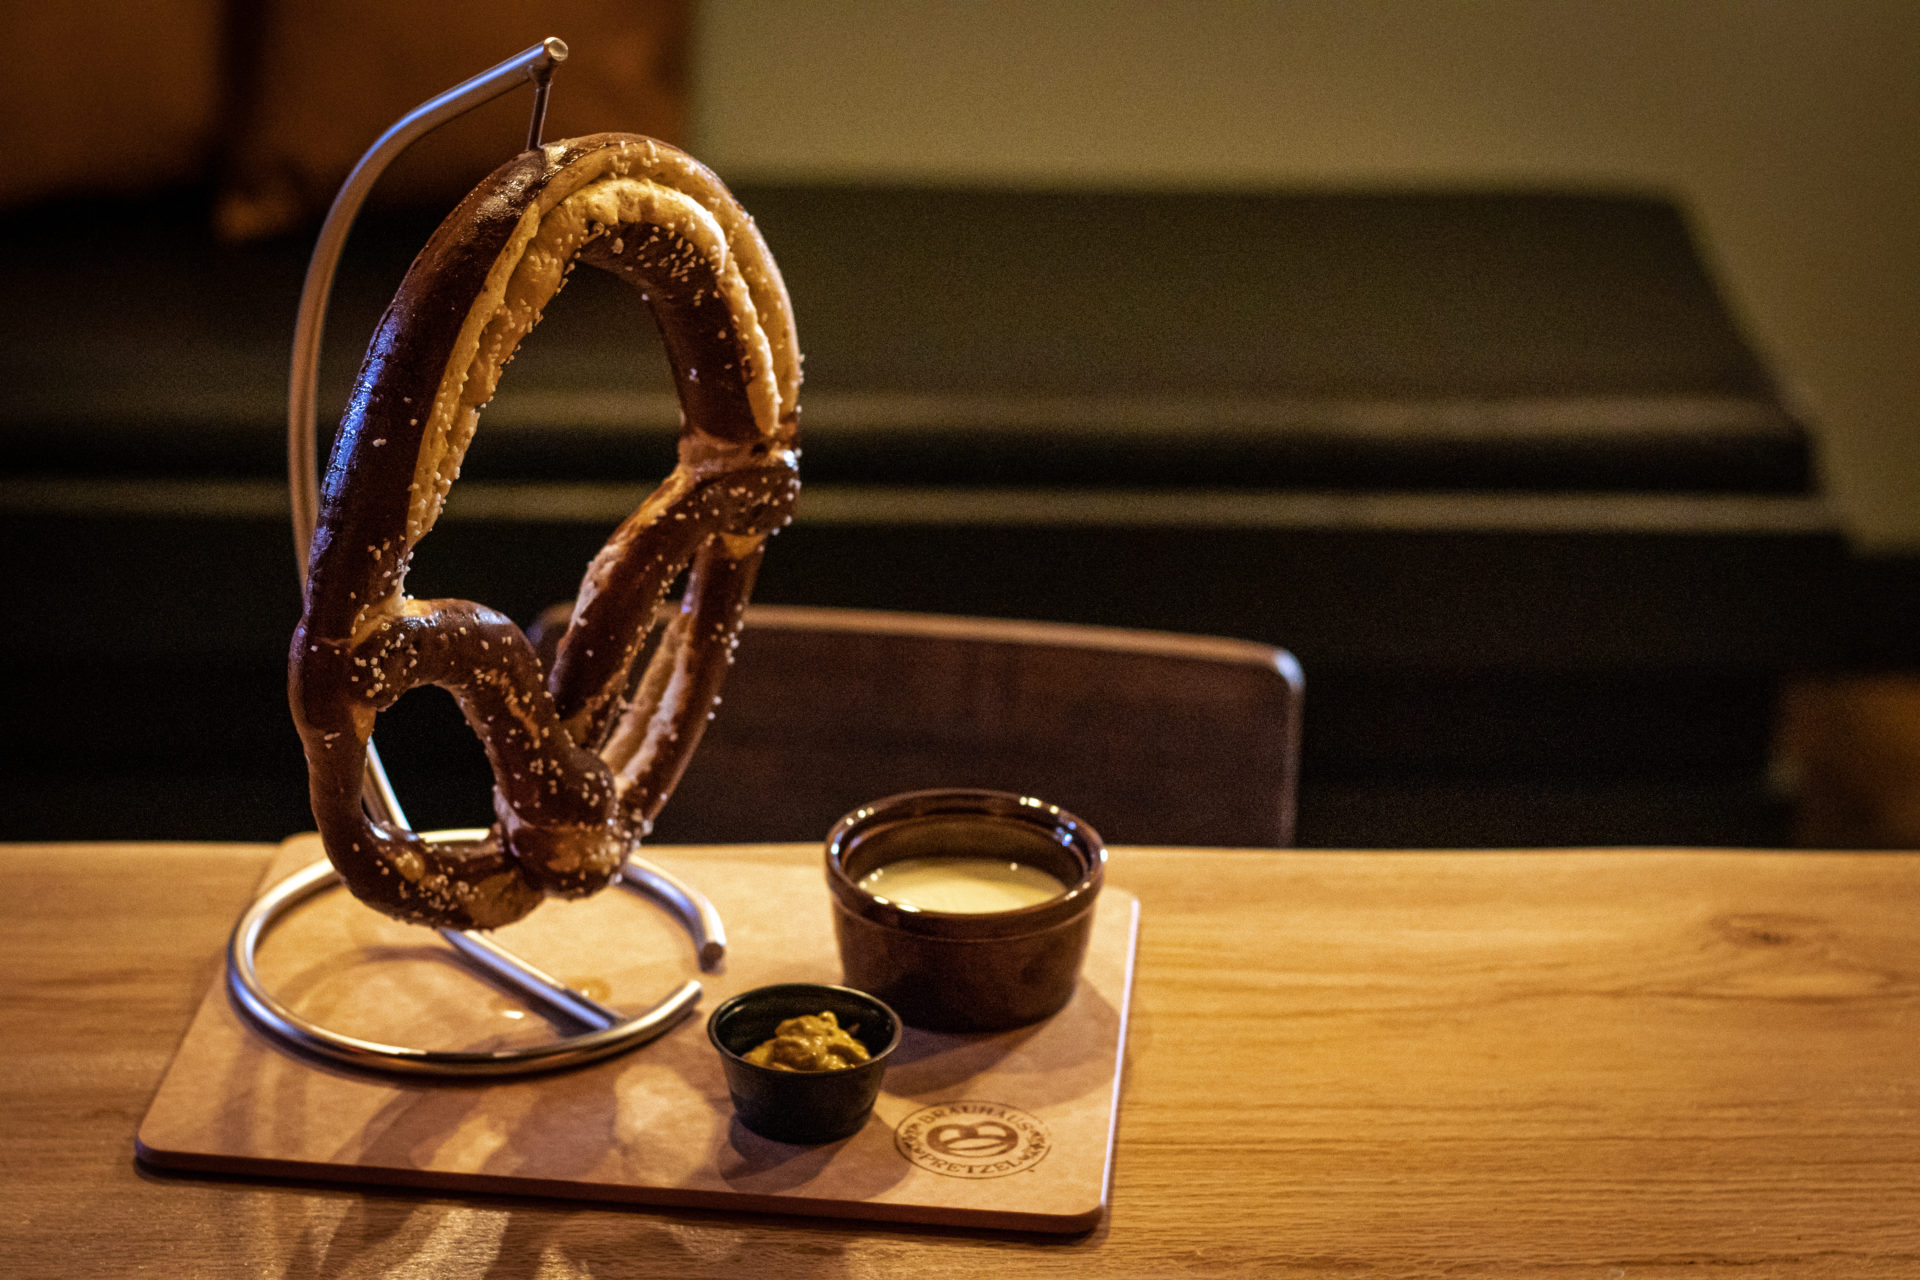 German Pretzel hanging on a stylish stand at The Legendary Axe throwing ann arbor.